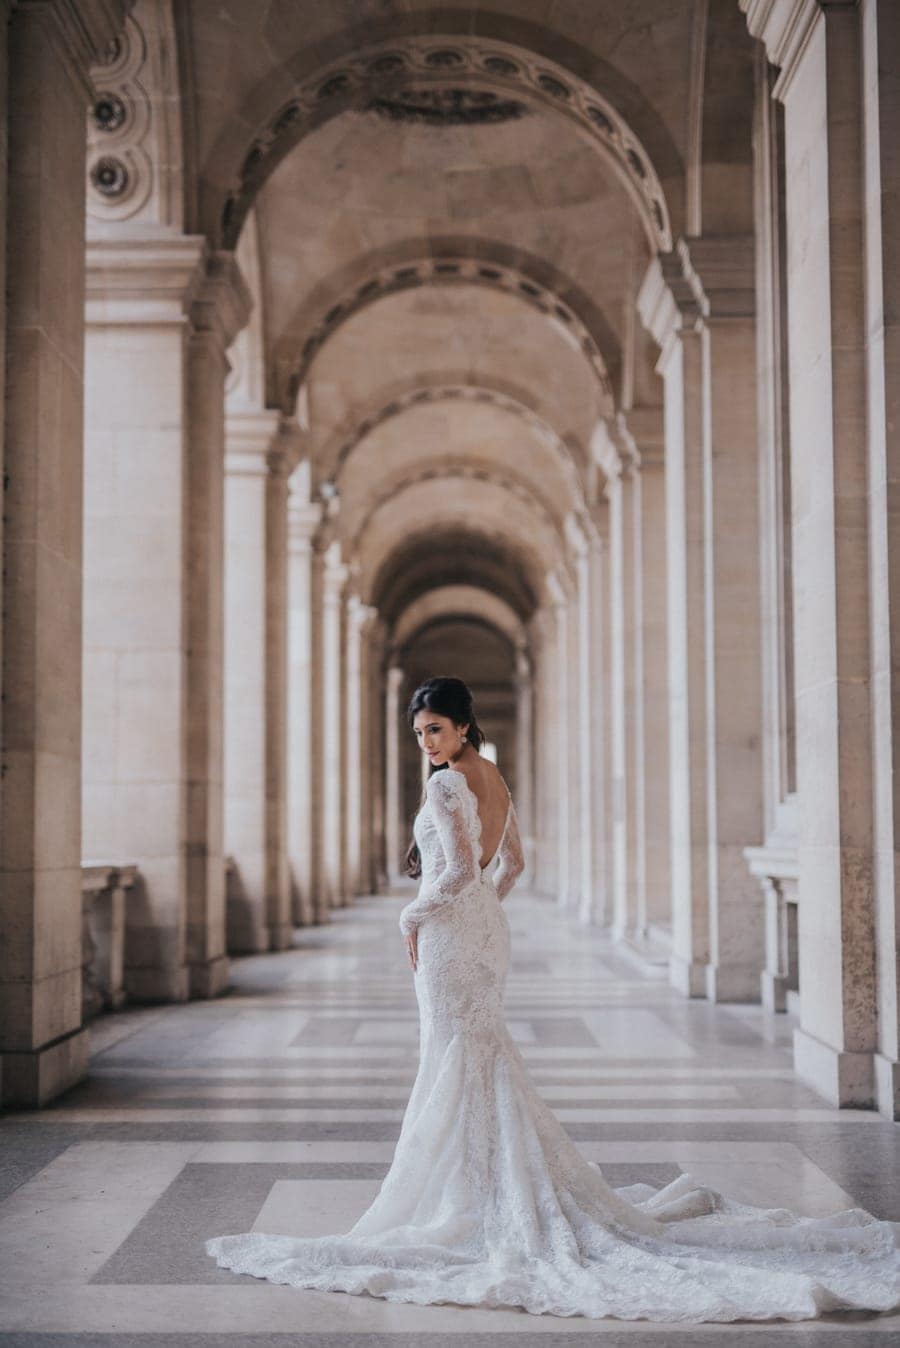 The Top 13 to Consider When Planning a Destination Wedding - What I Learned! (wedding photos - the louvre)